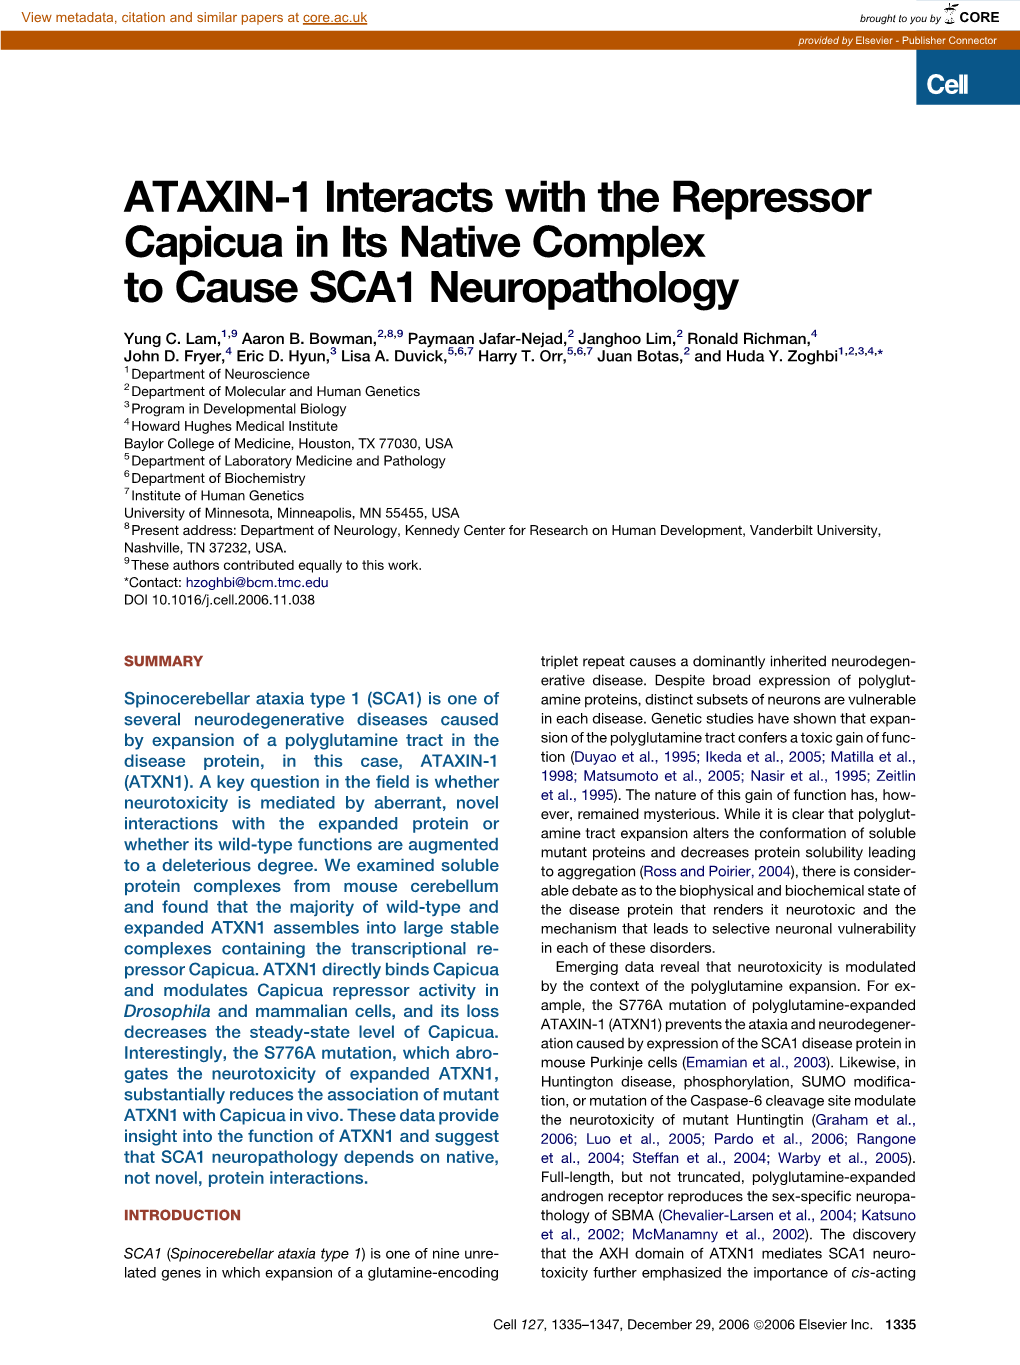 ATAXIN-1 Interacts with the Repressor Capicua in Its Native Complex to Cause SCA1 Neuropathology